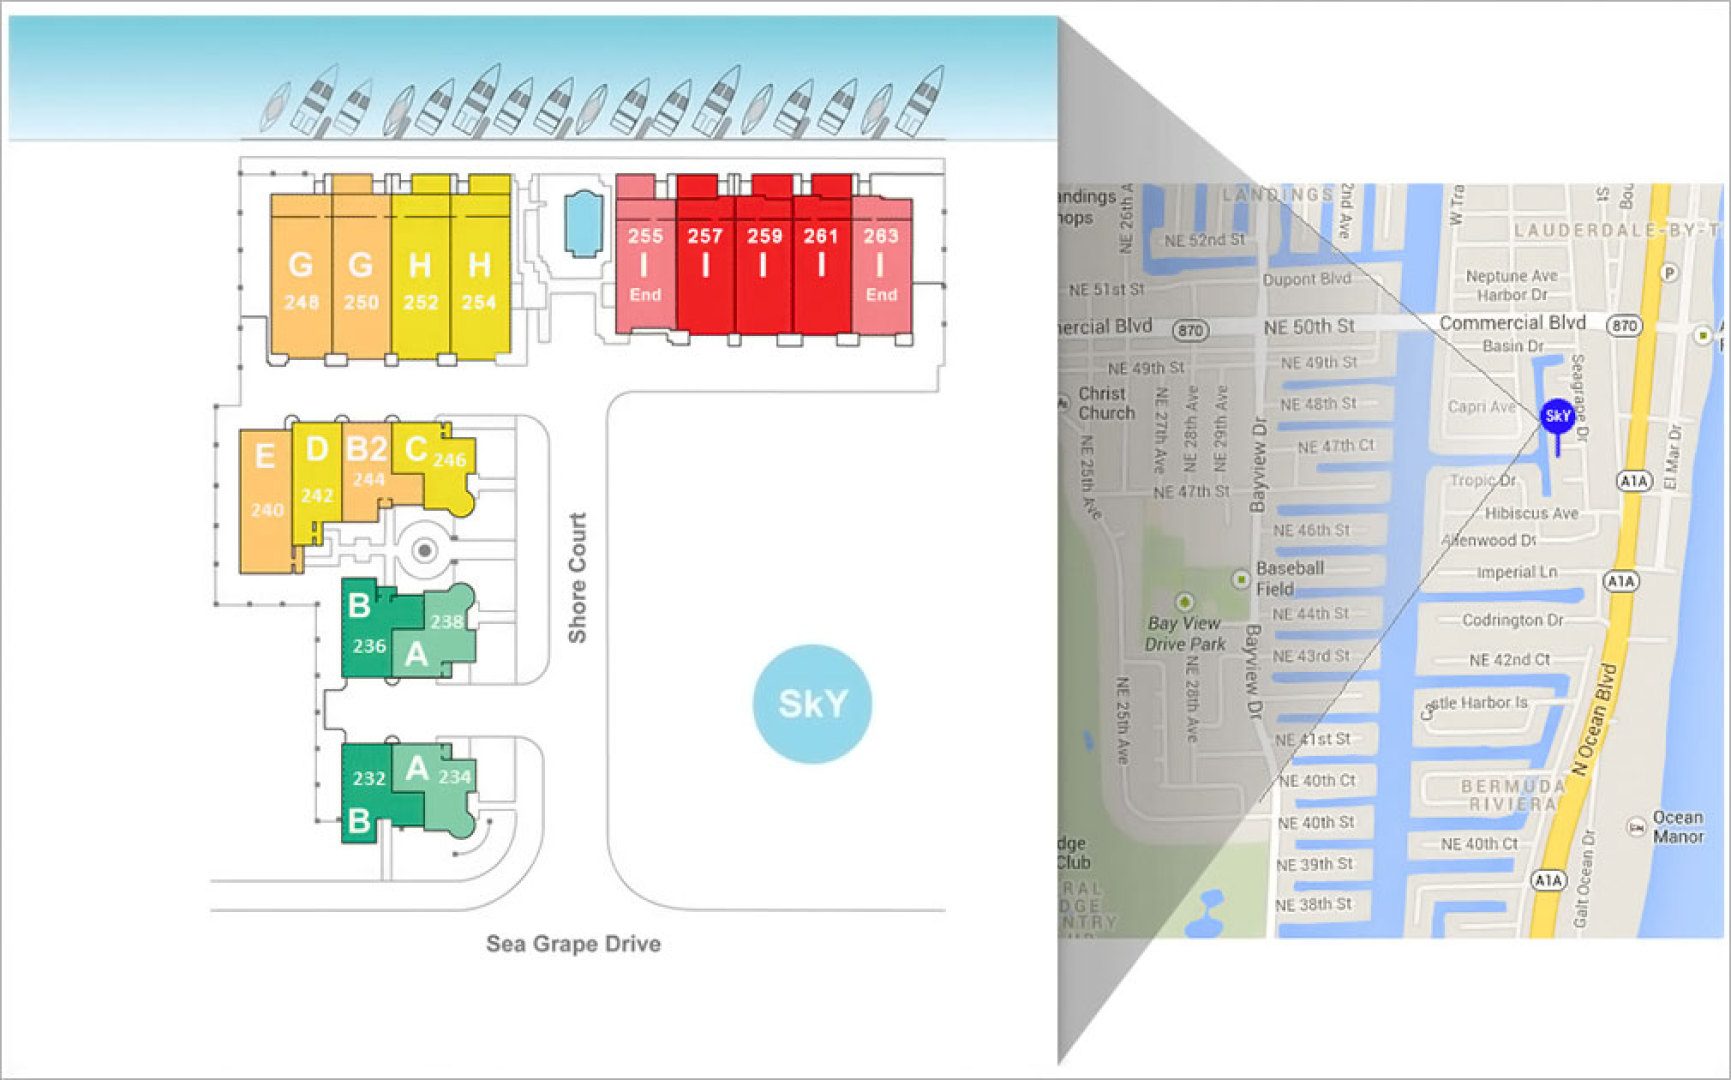 Siteplan for Sky230, Luxury Waterfront Townhomes in Lauderdale-by-the-Sea, Florida 33308